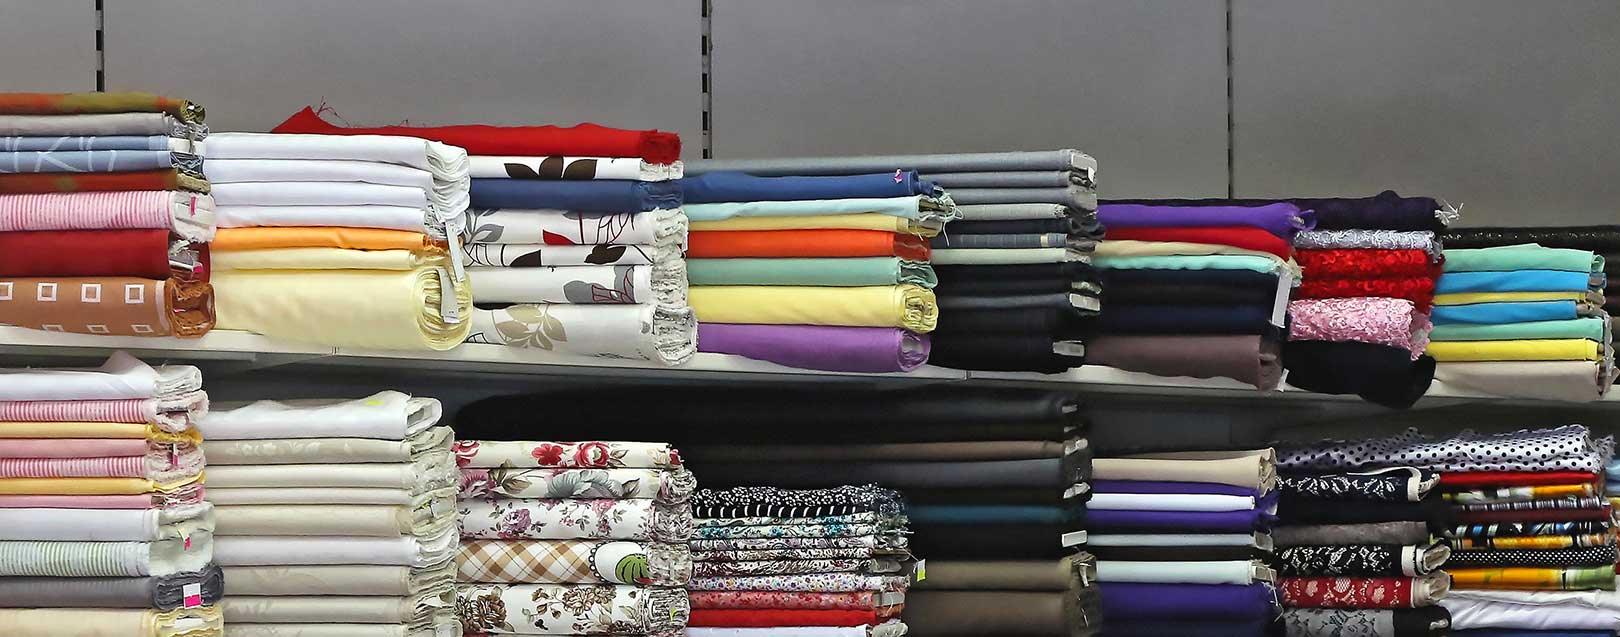 Gujarat textile industry demands heavy import duty on Chinese fabrics